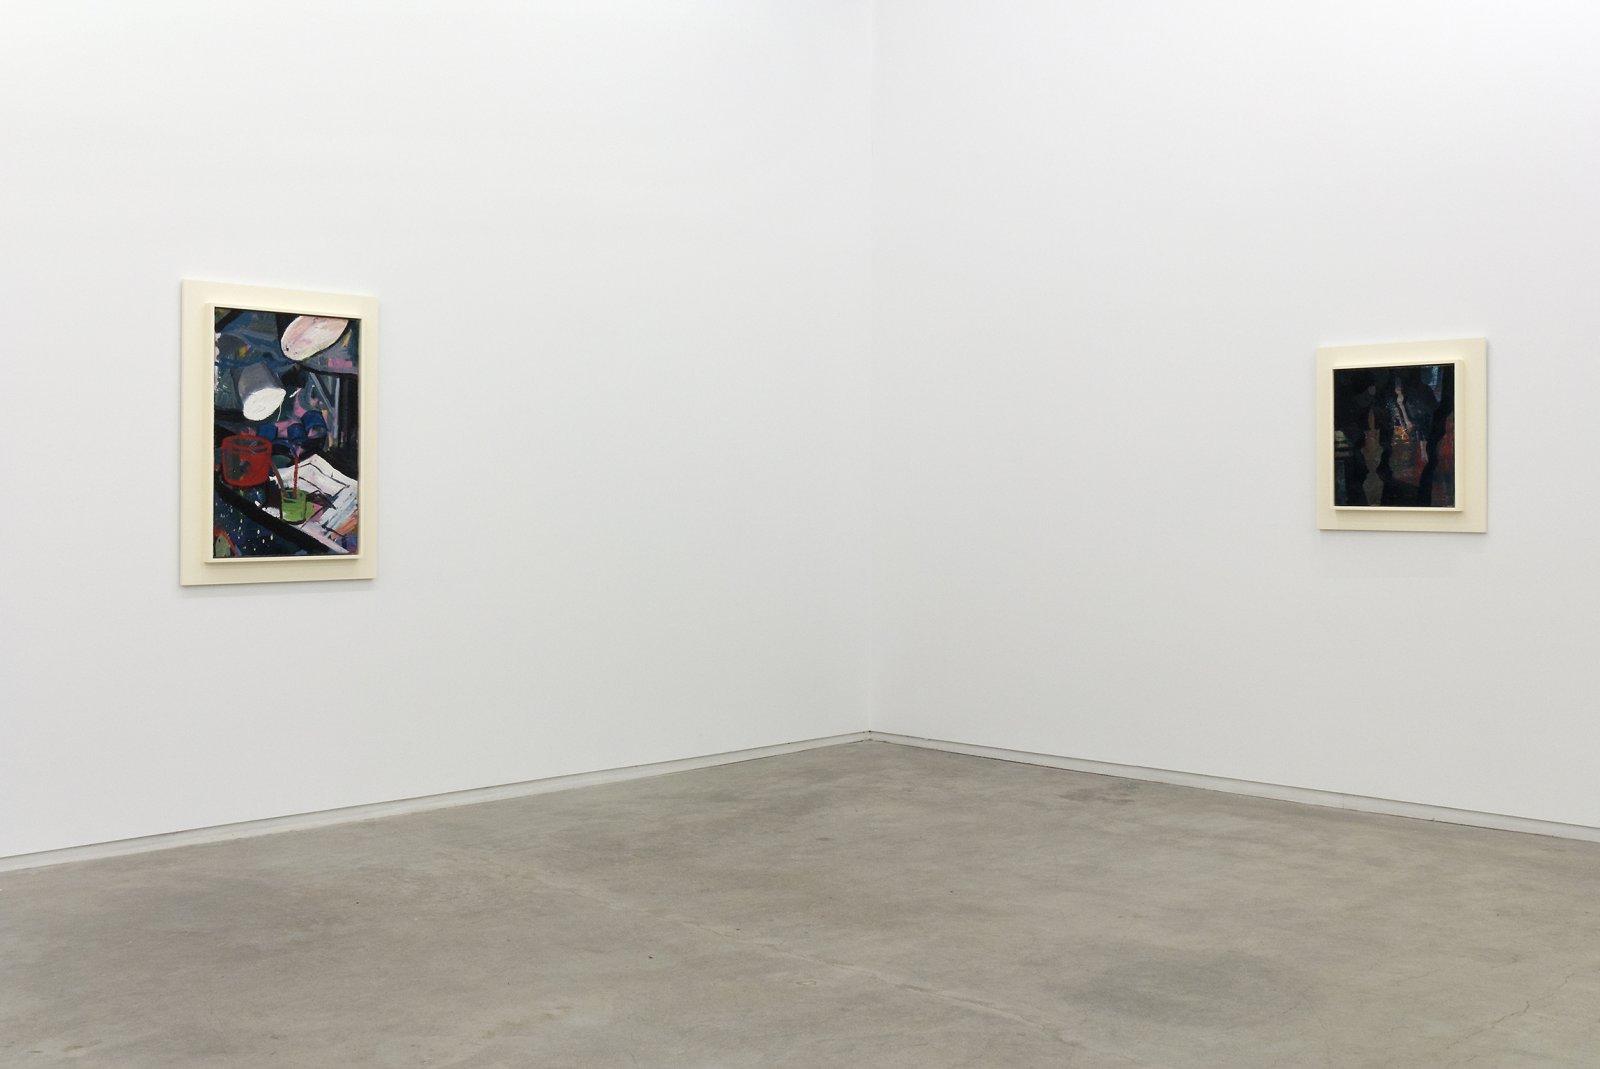 Damian Moppett, installation view, The Sculptor's Studio is a Painting, Catriona Jeffries, 2010 by Damian Moppett